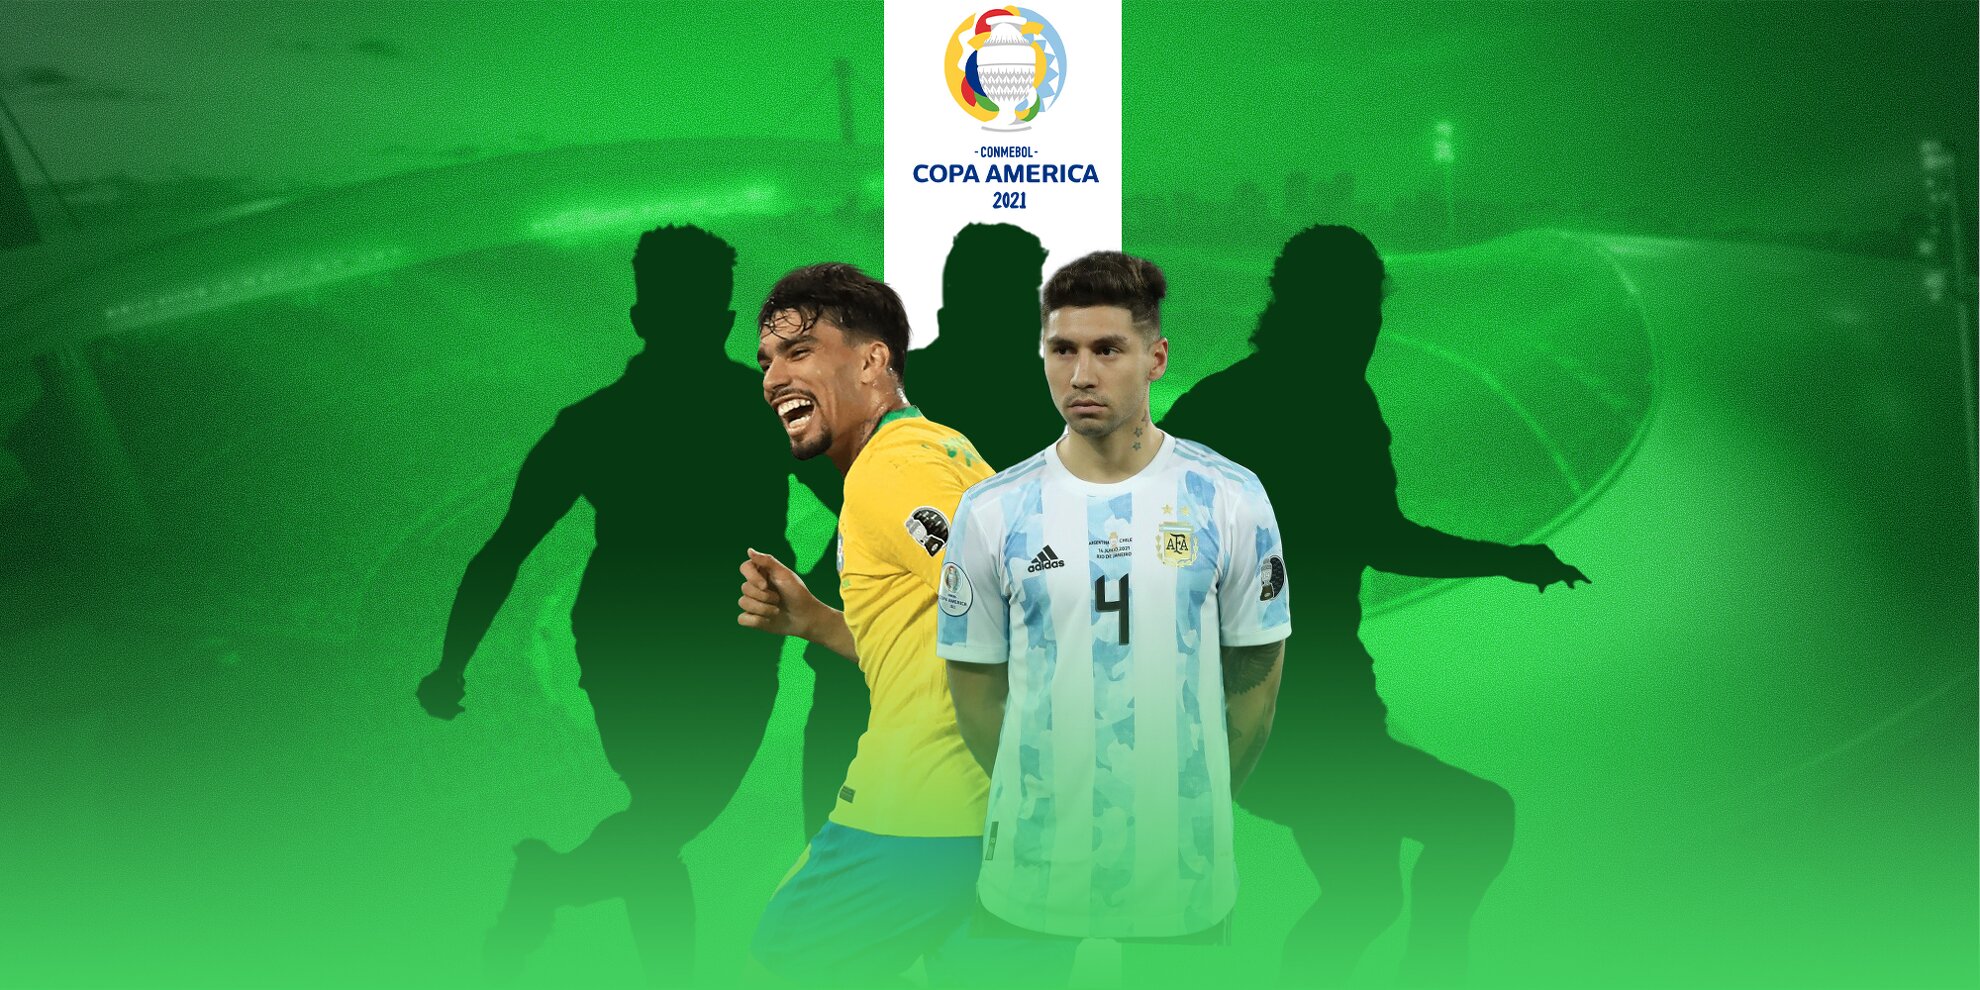 Copa America 2021 younsters